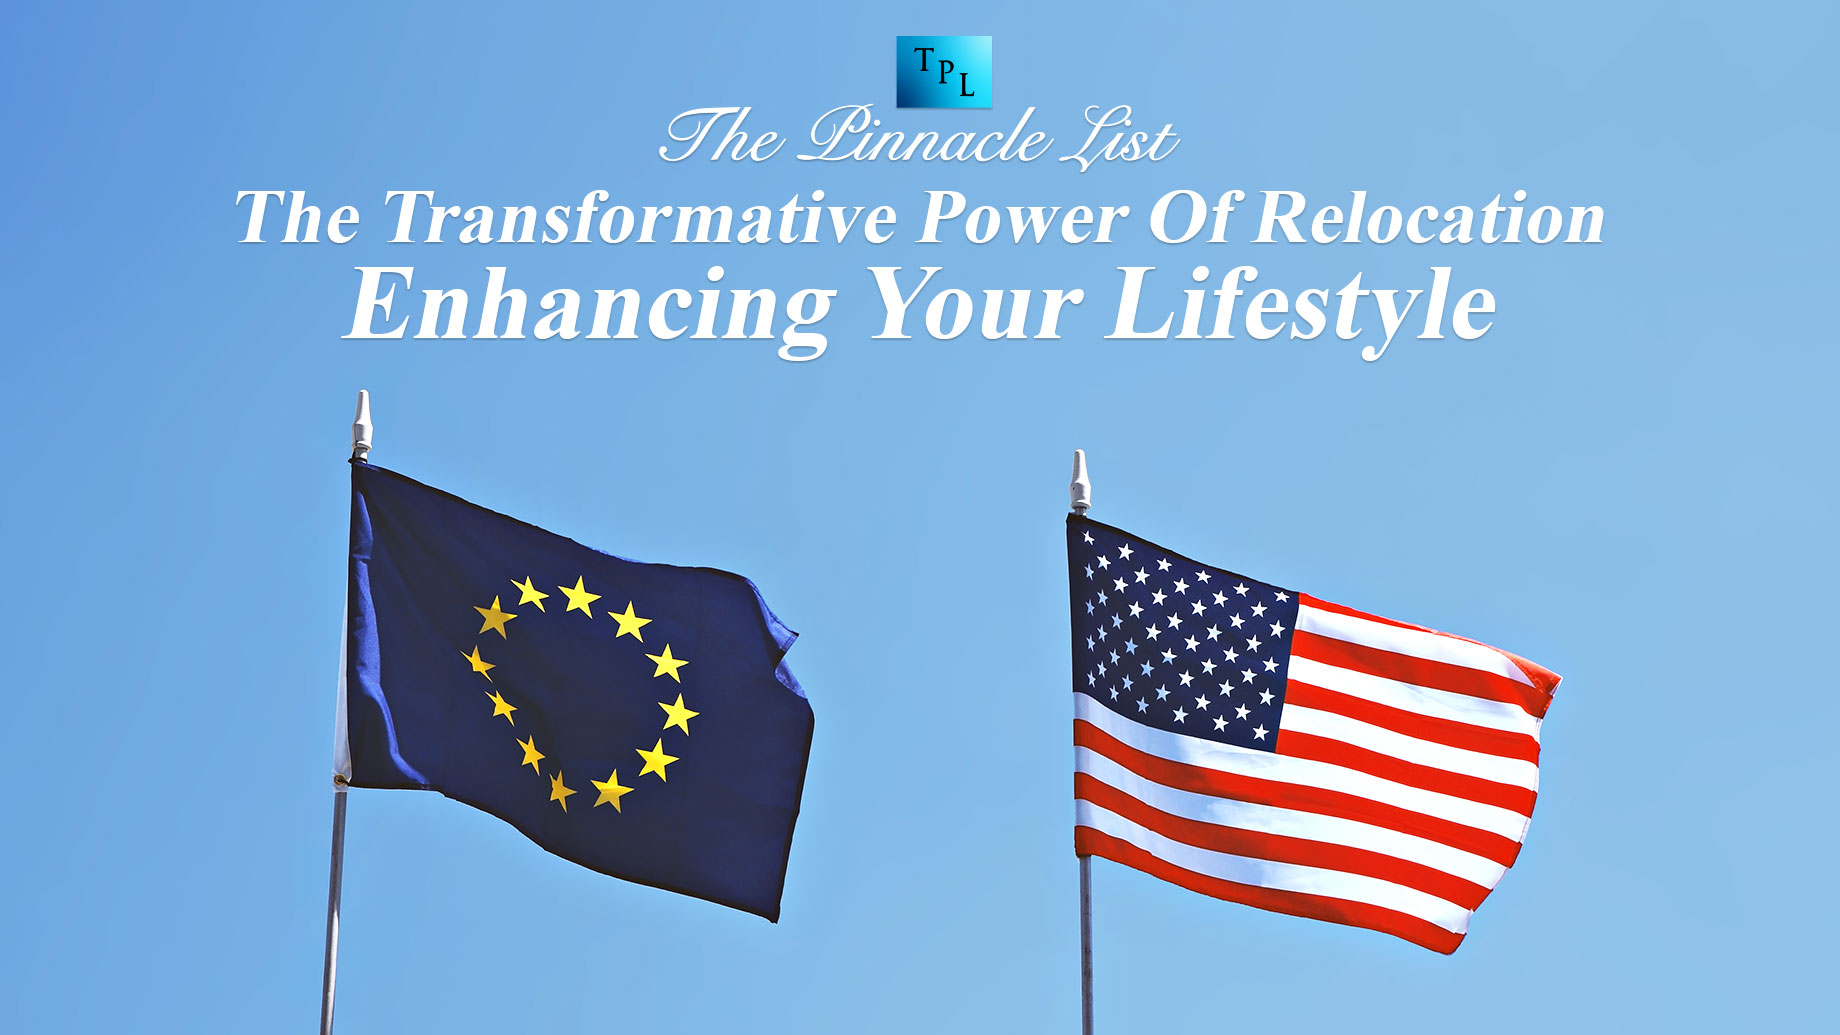 The Transformative Power Of Relocation: Enhancing Your Lifestyle